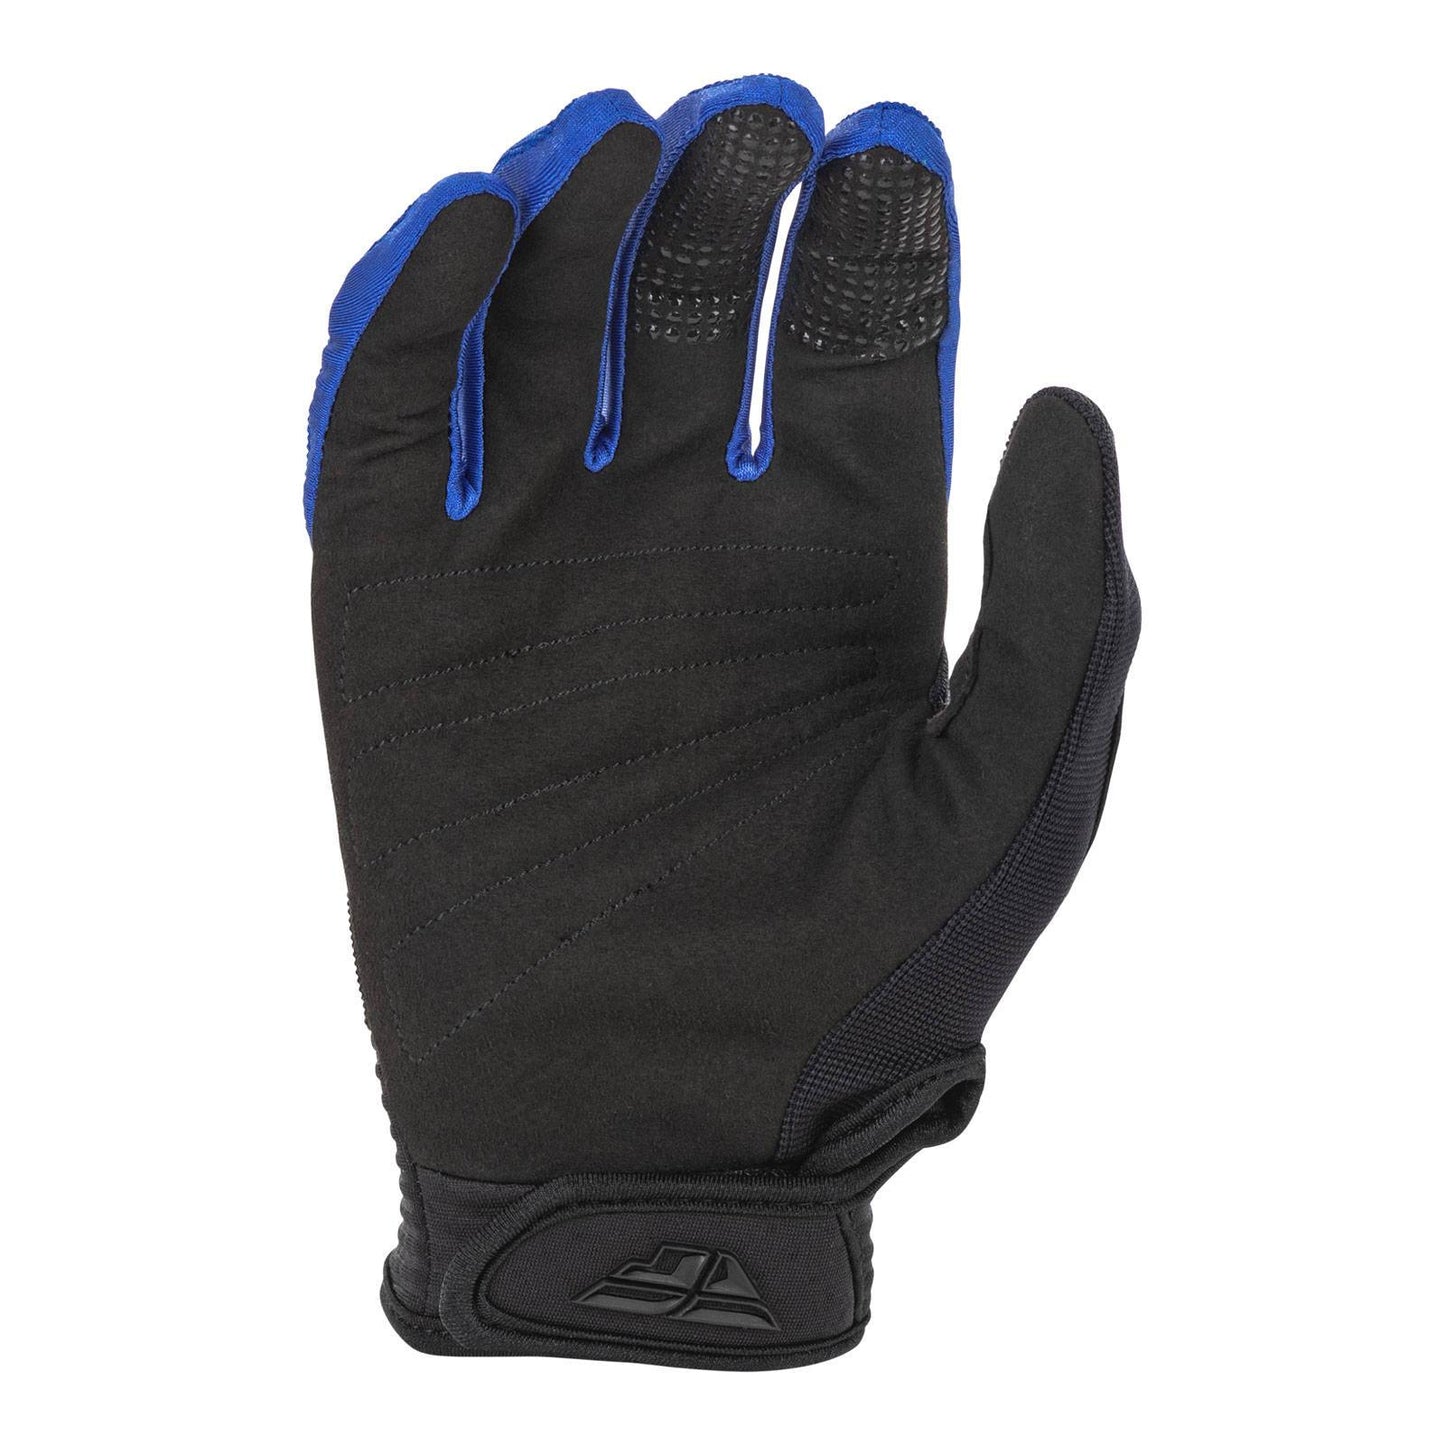 FLY '22 F-16 GLOVES